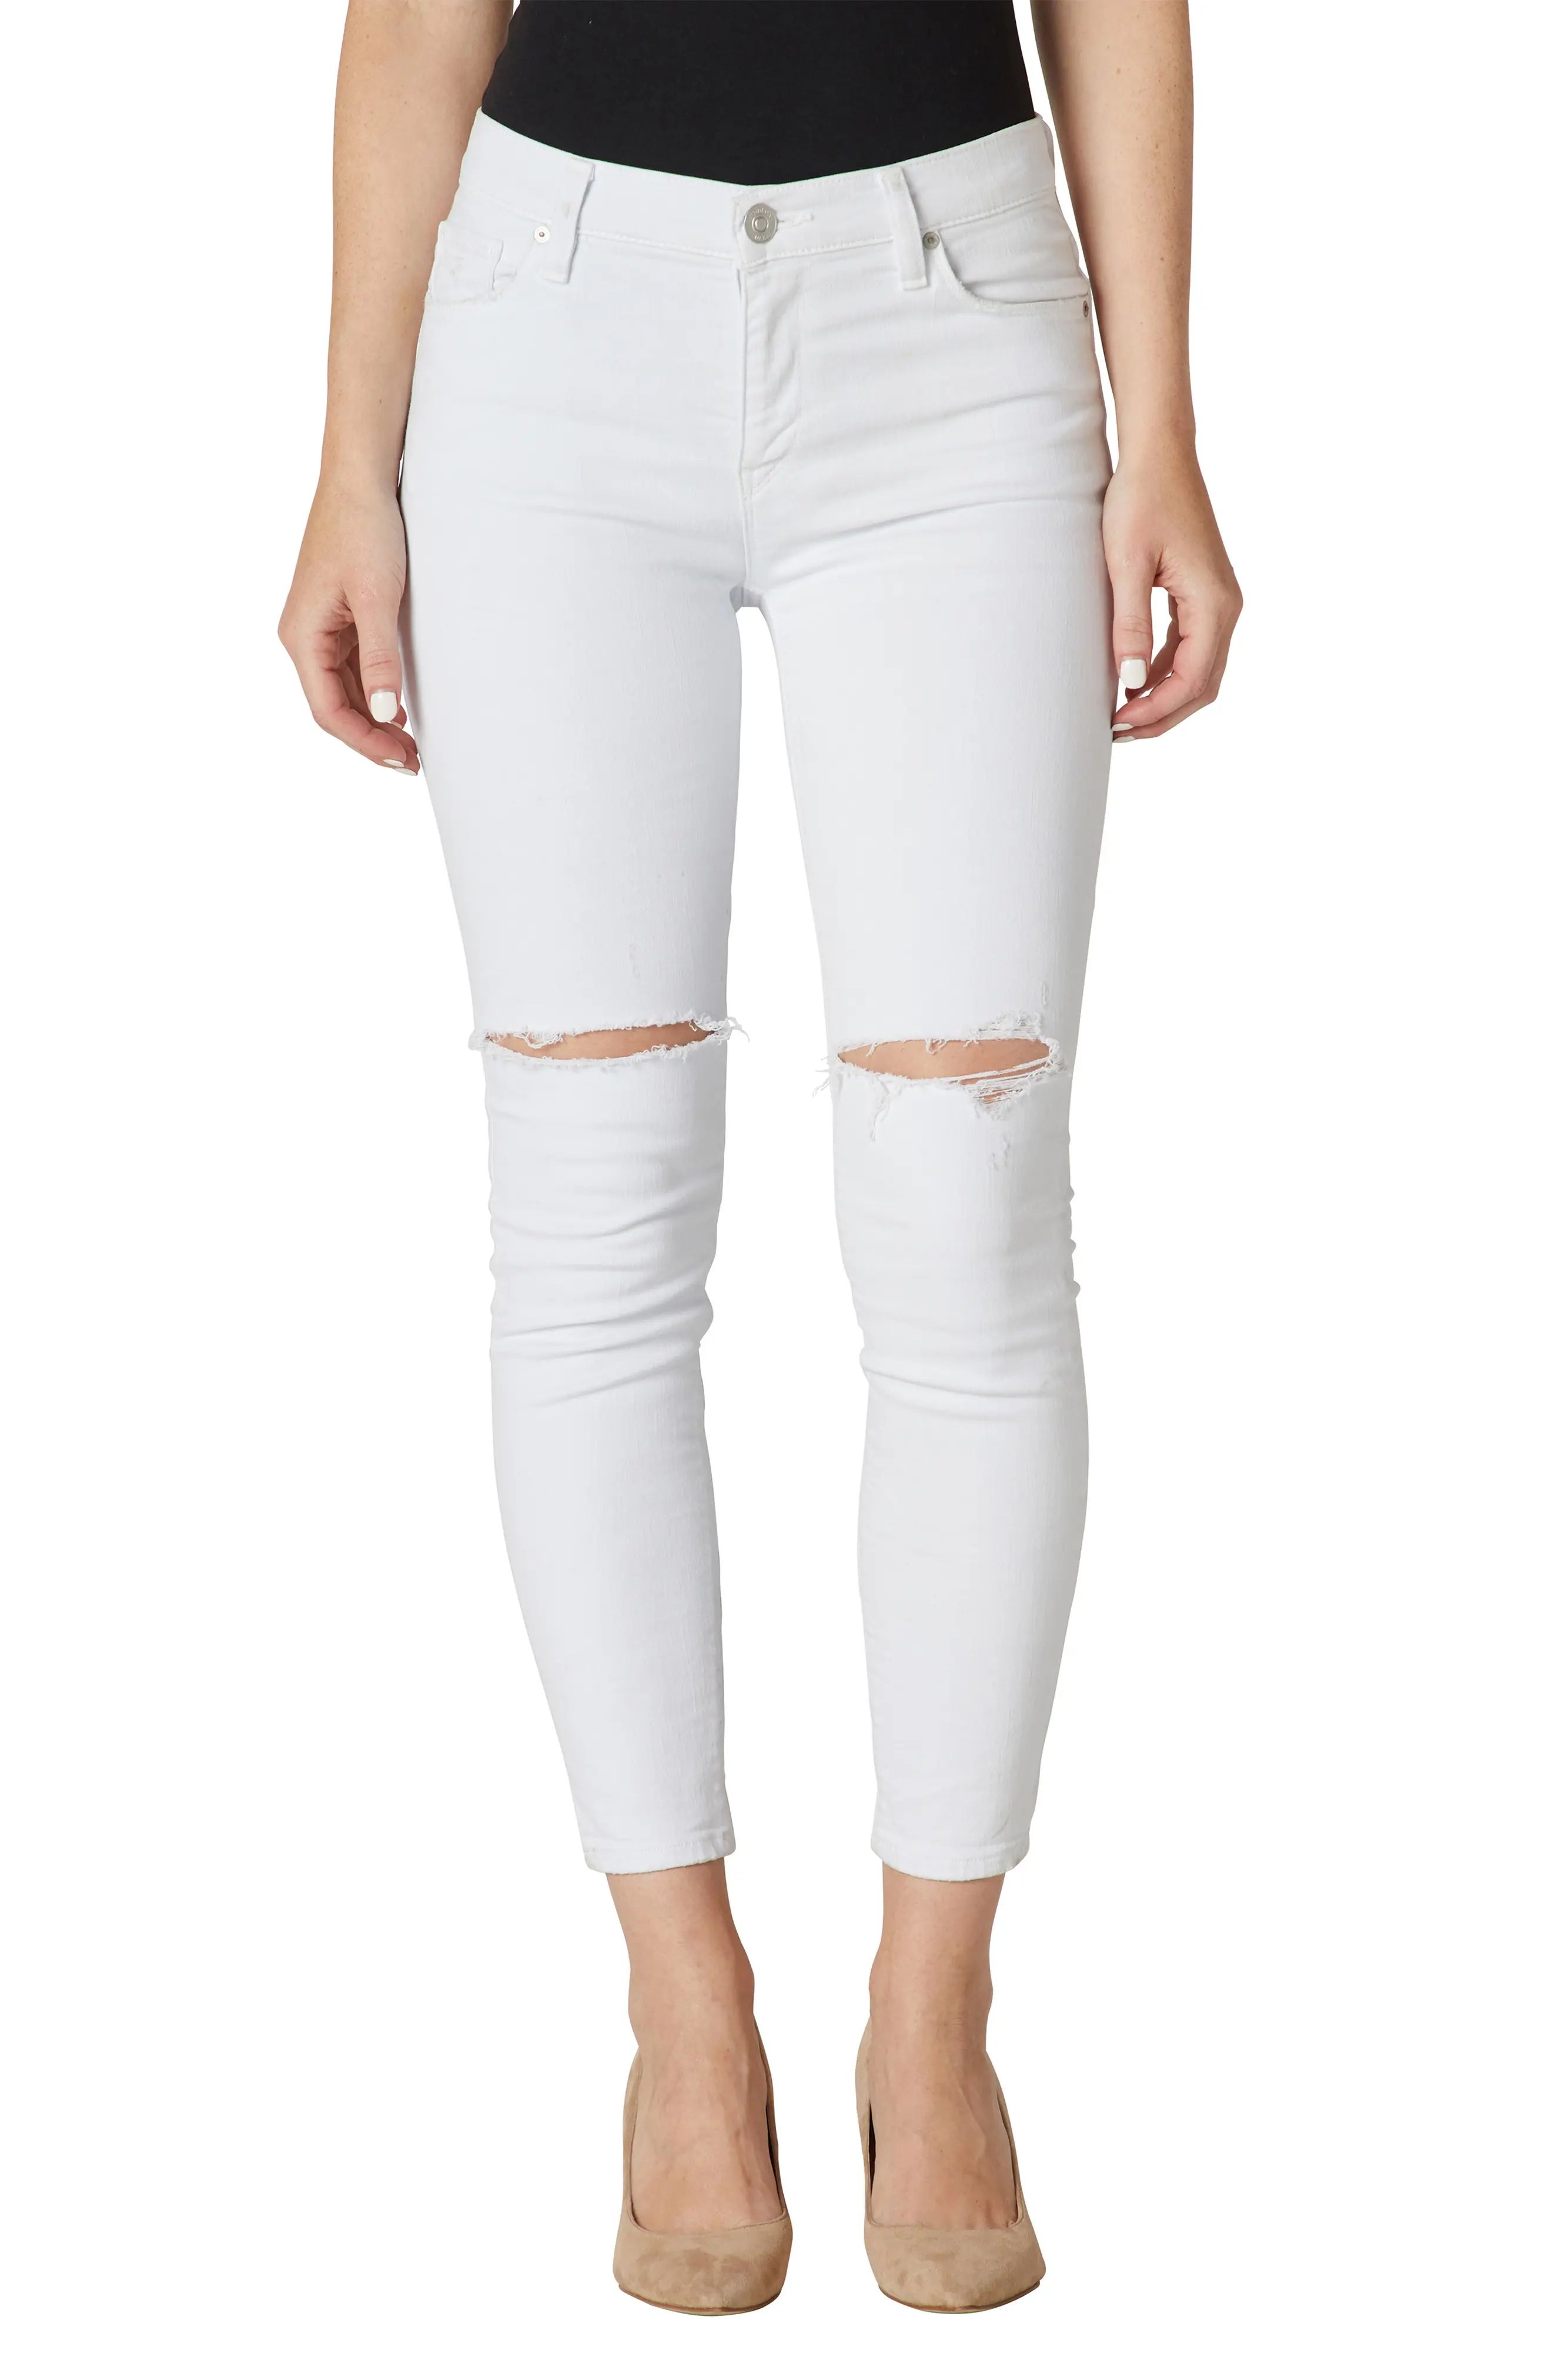 Women's Hudson Jeans Nico Ripped Crop Skinny Jeans, Size 27 - White | Nordstrom